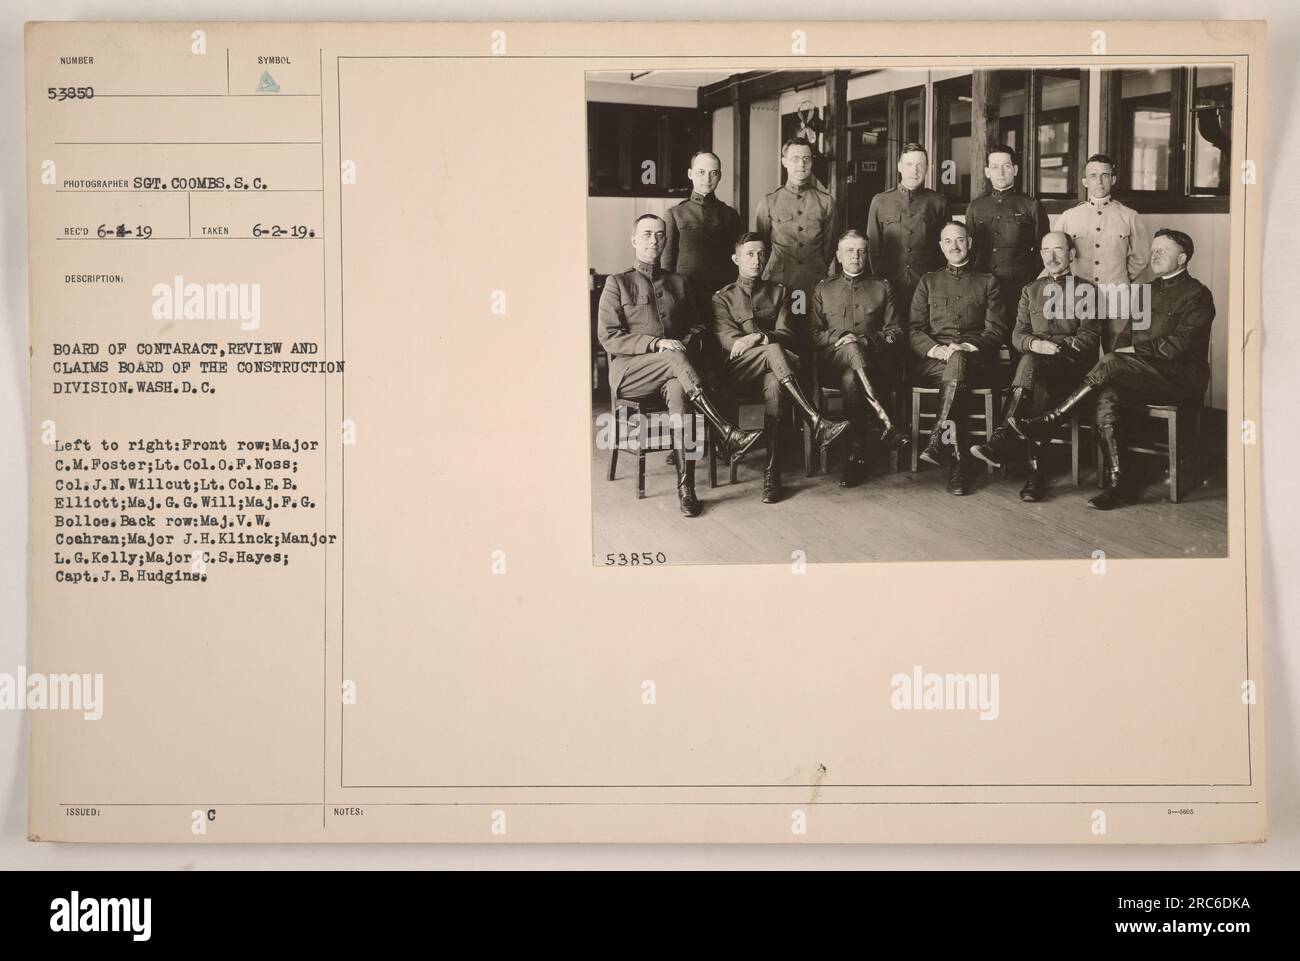 Board of Contract Review and Claims Board of the Construction Division, Wash. D.C, in a meeting on June 2, 1919. The image shows members of the board, including Major C.M. Foster, Lt. Col. O.F. Noss, Col. J.N. Willout, Lt. Col. E.B. Elliott, Maj. G.G. Will, Maj. P.G. Bollos in the front row. In the back row are Maj. V.W. Coahran, Major J.H. Klinck, Major L.G. Kelly, Major C.S. Hayes, and Capt. J.B. Hudgins. Stock Photo